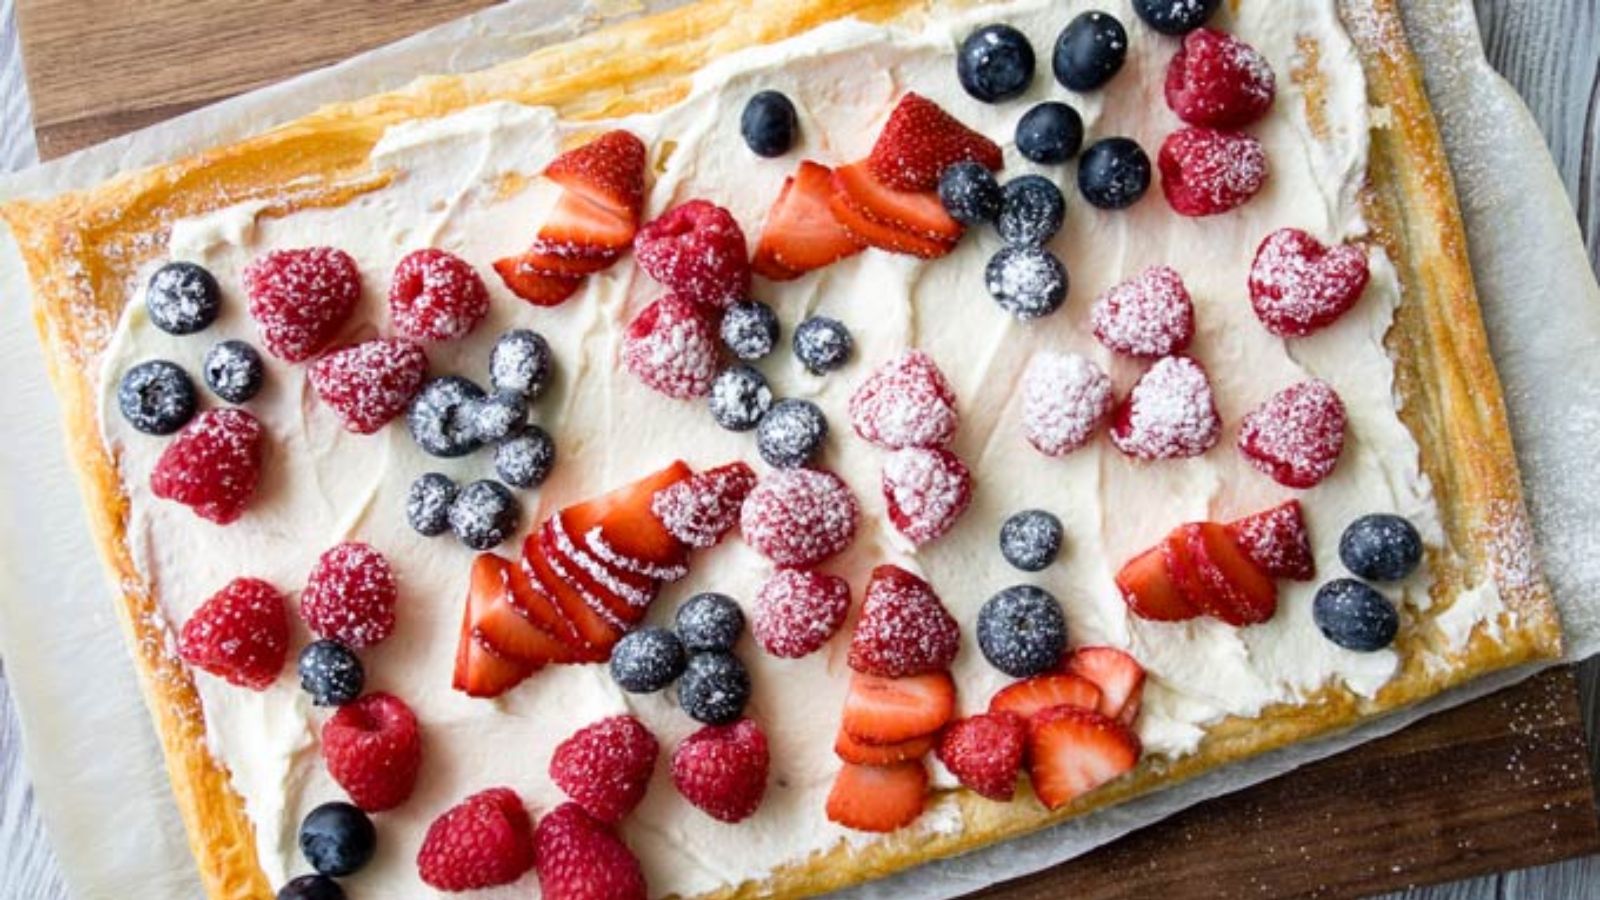 RED, WHITE AND BLUE PASTRY BREAKFAST TART 